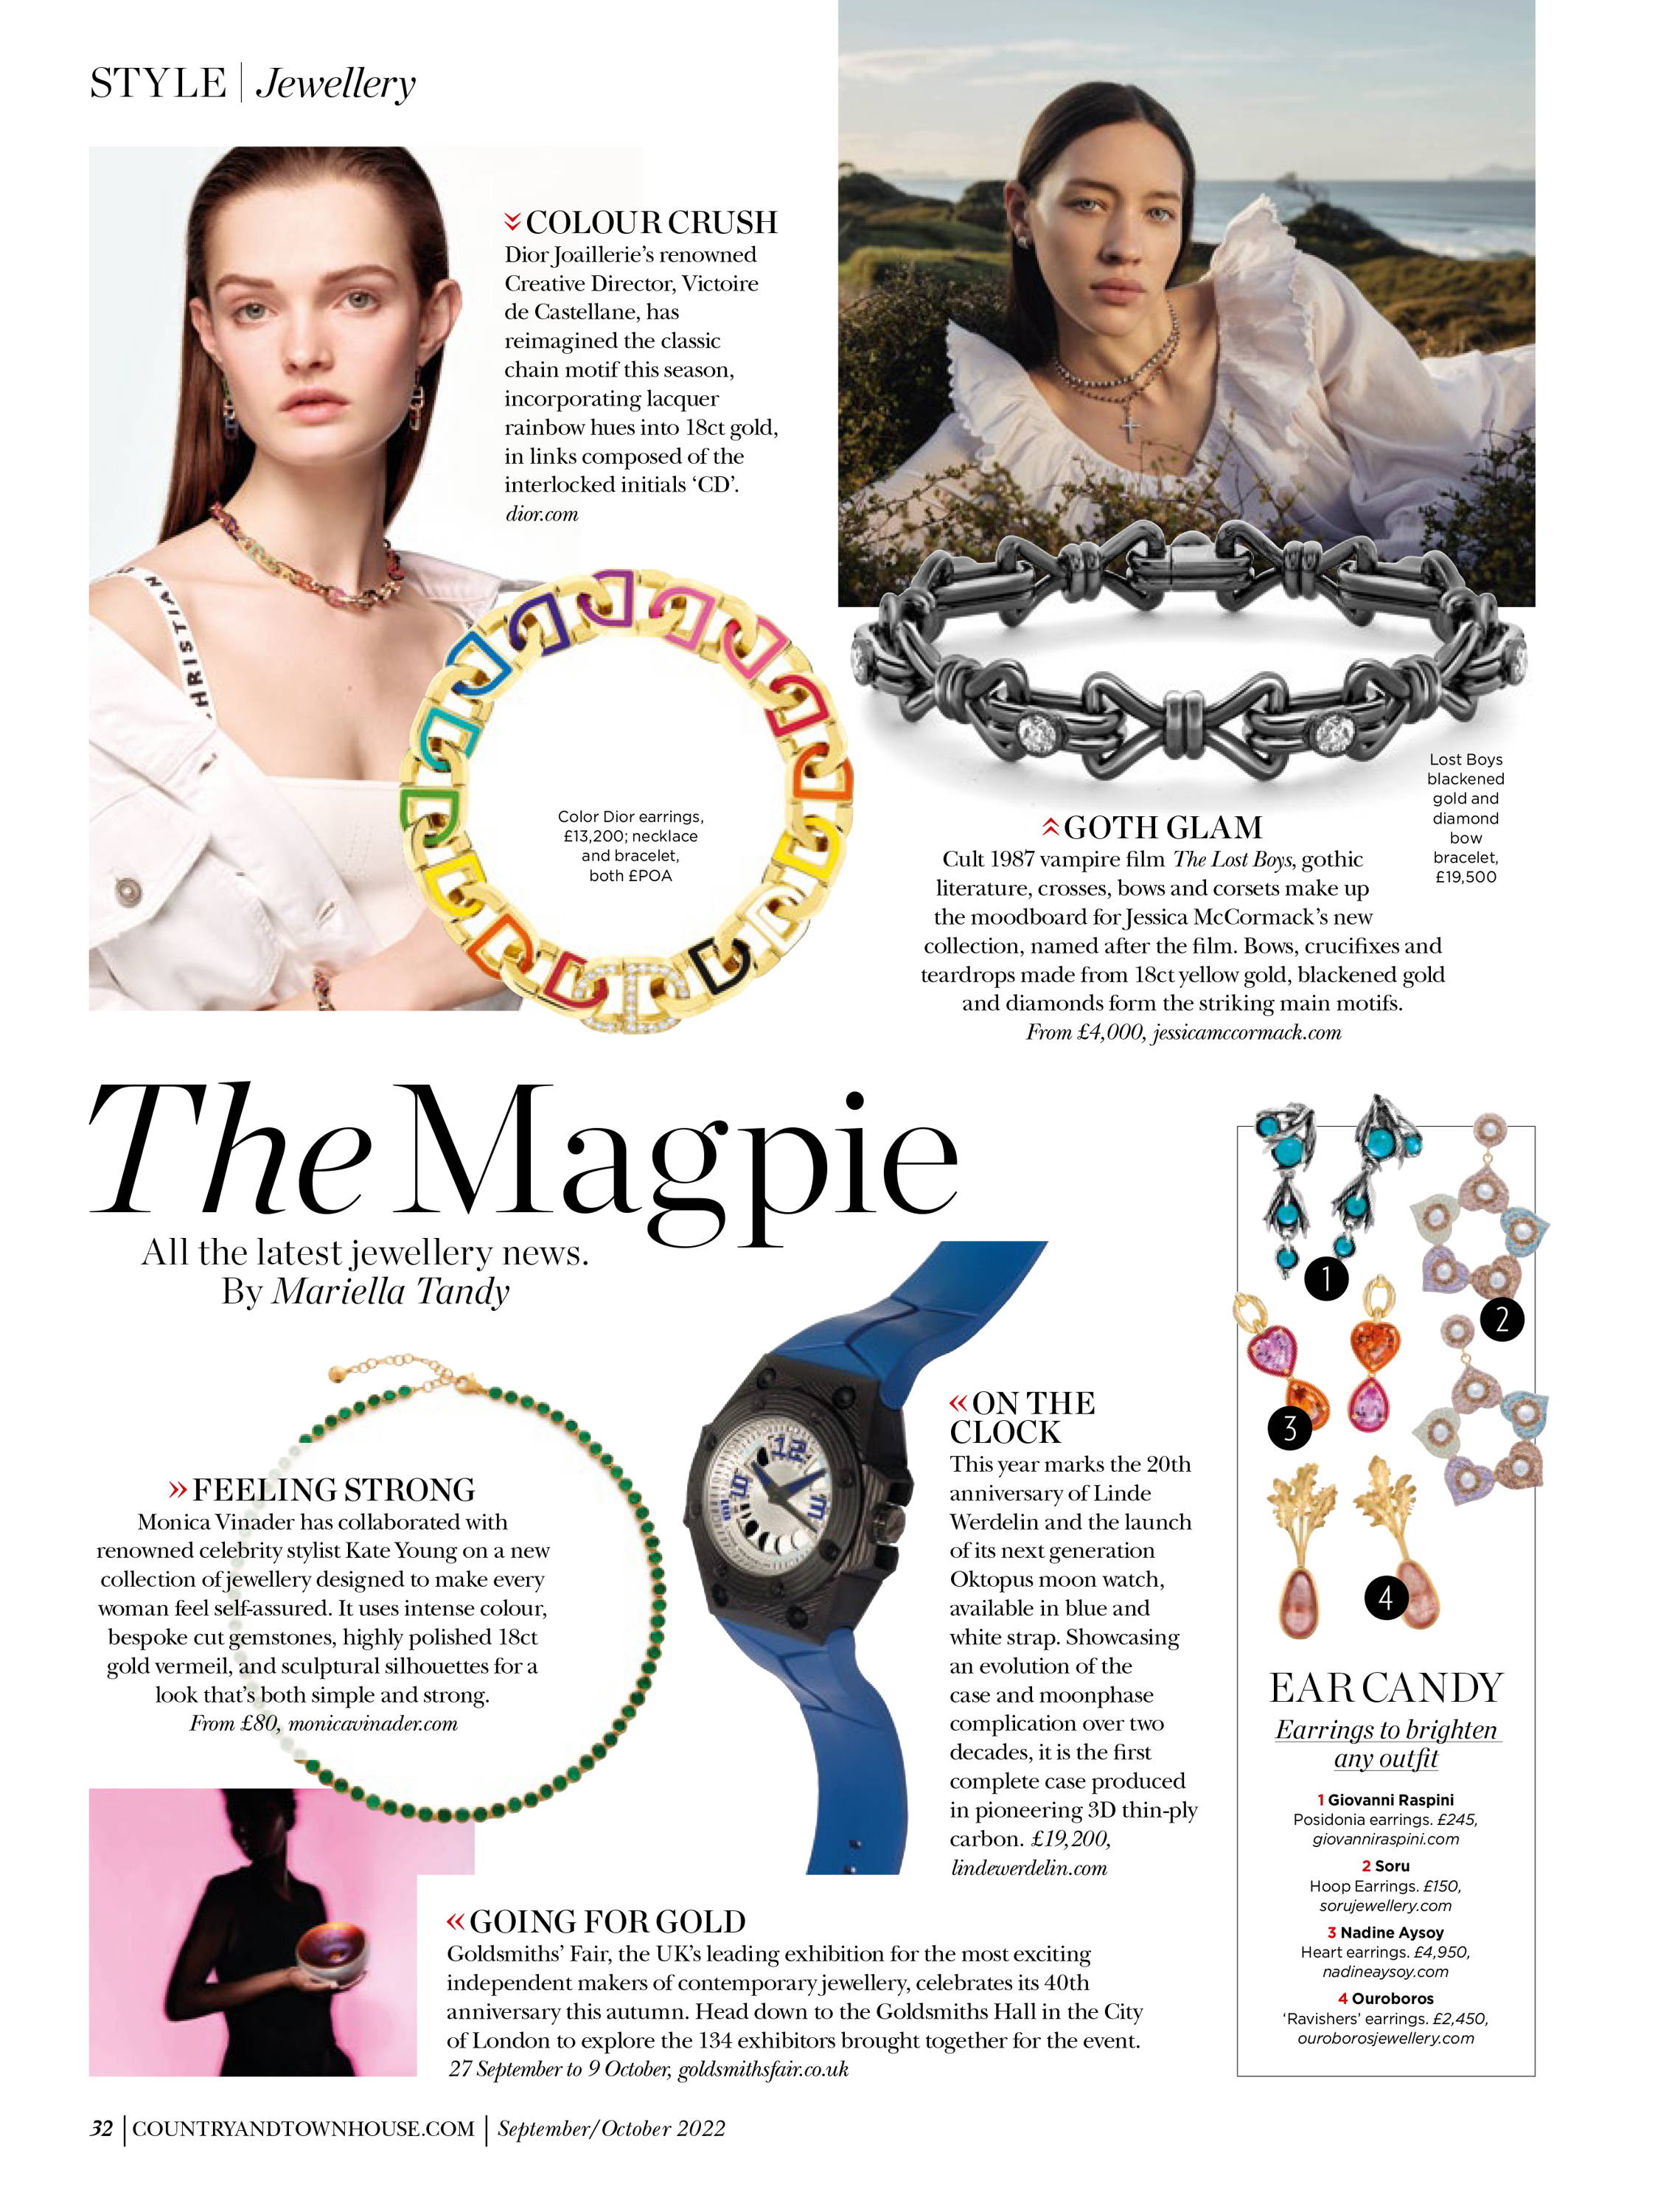 County & Town House Magazine features Soru Jewellery Pastel Flower hoops